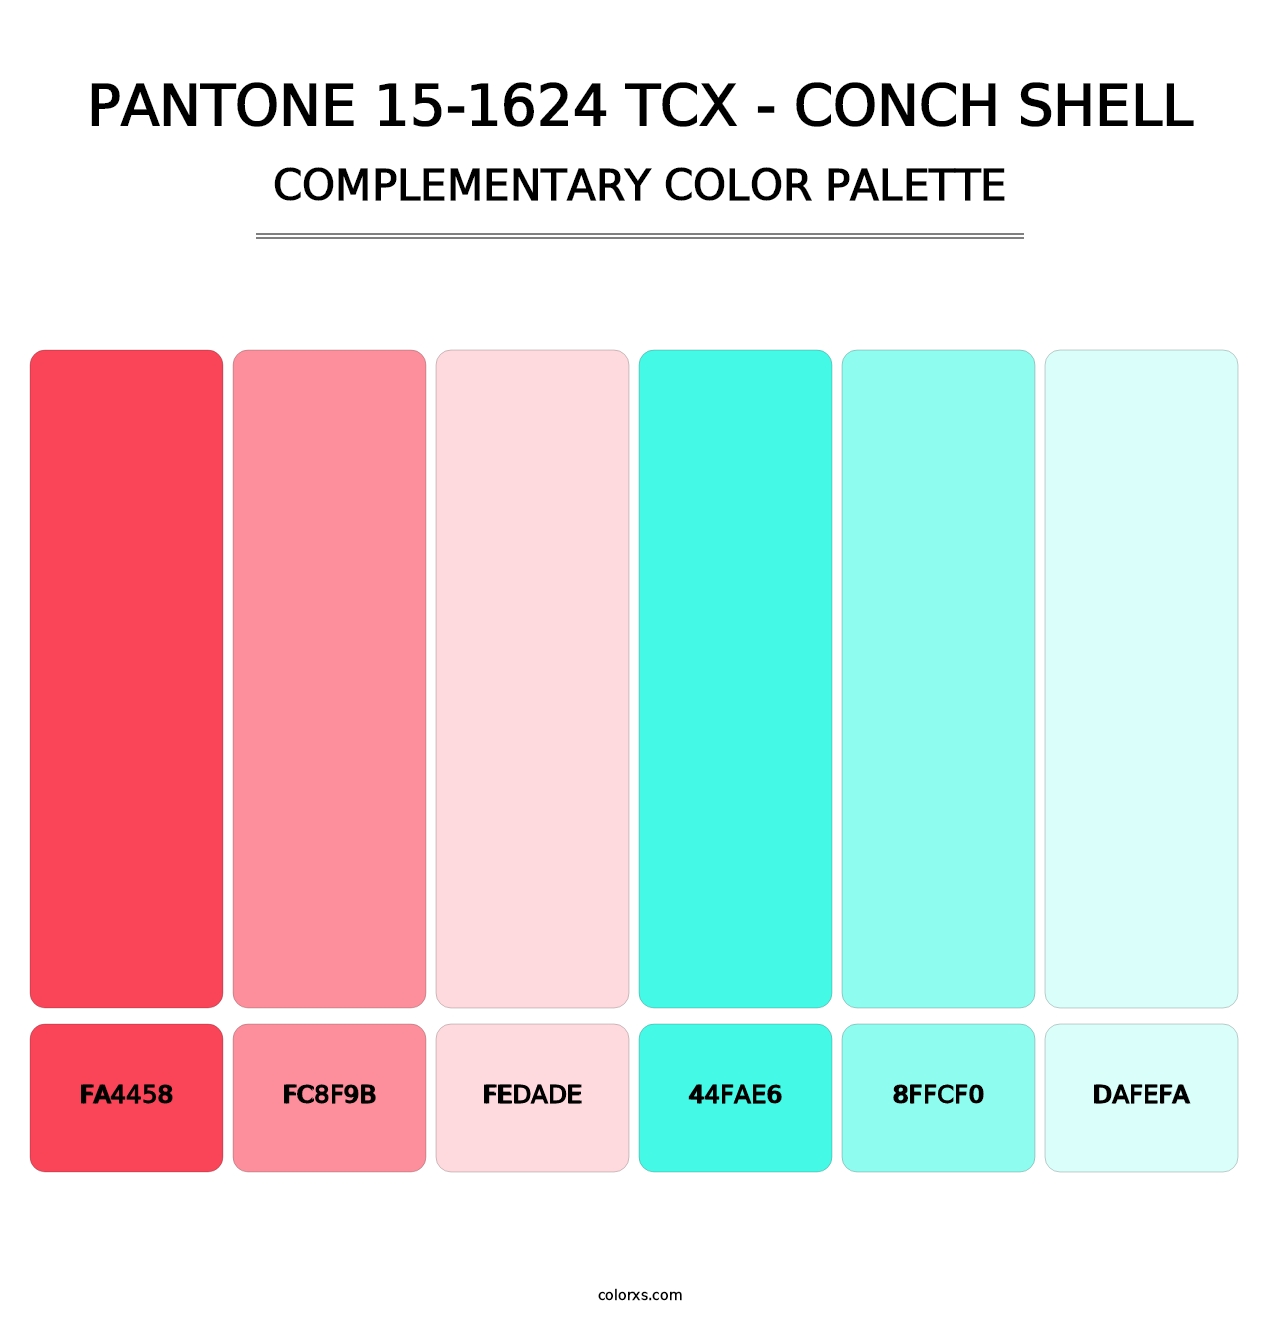 PANTONE 15-1624 TCX - Conch Shell - Complementary Color Palette